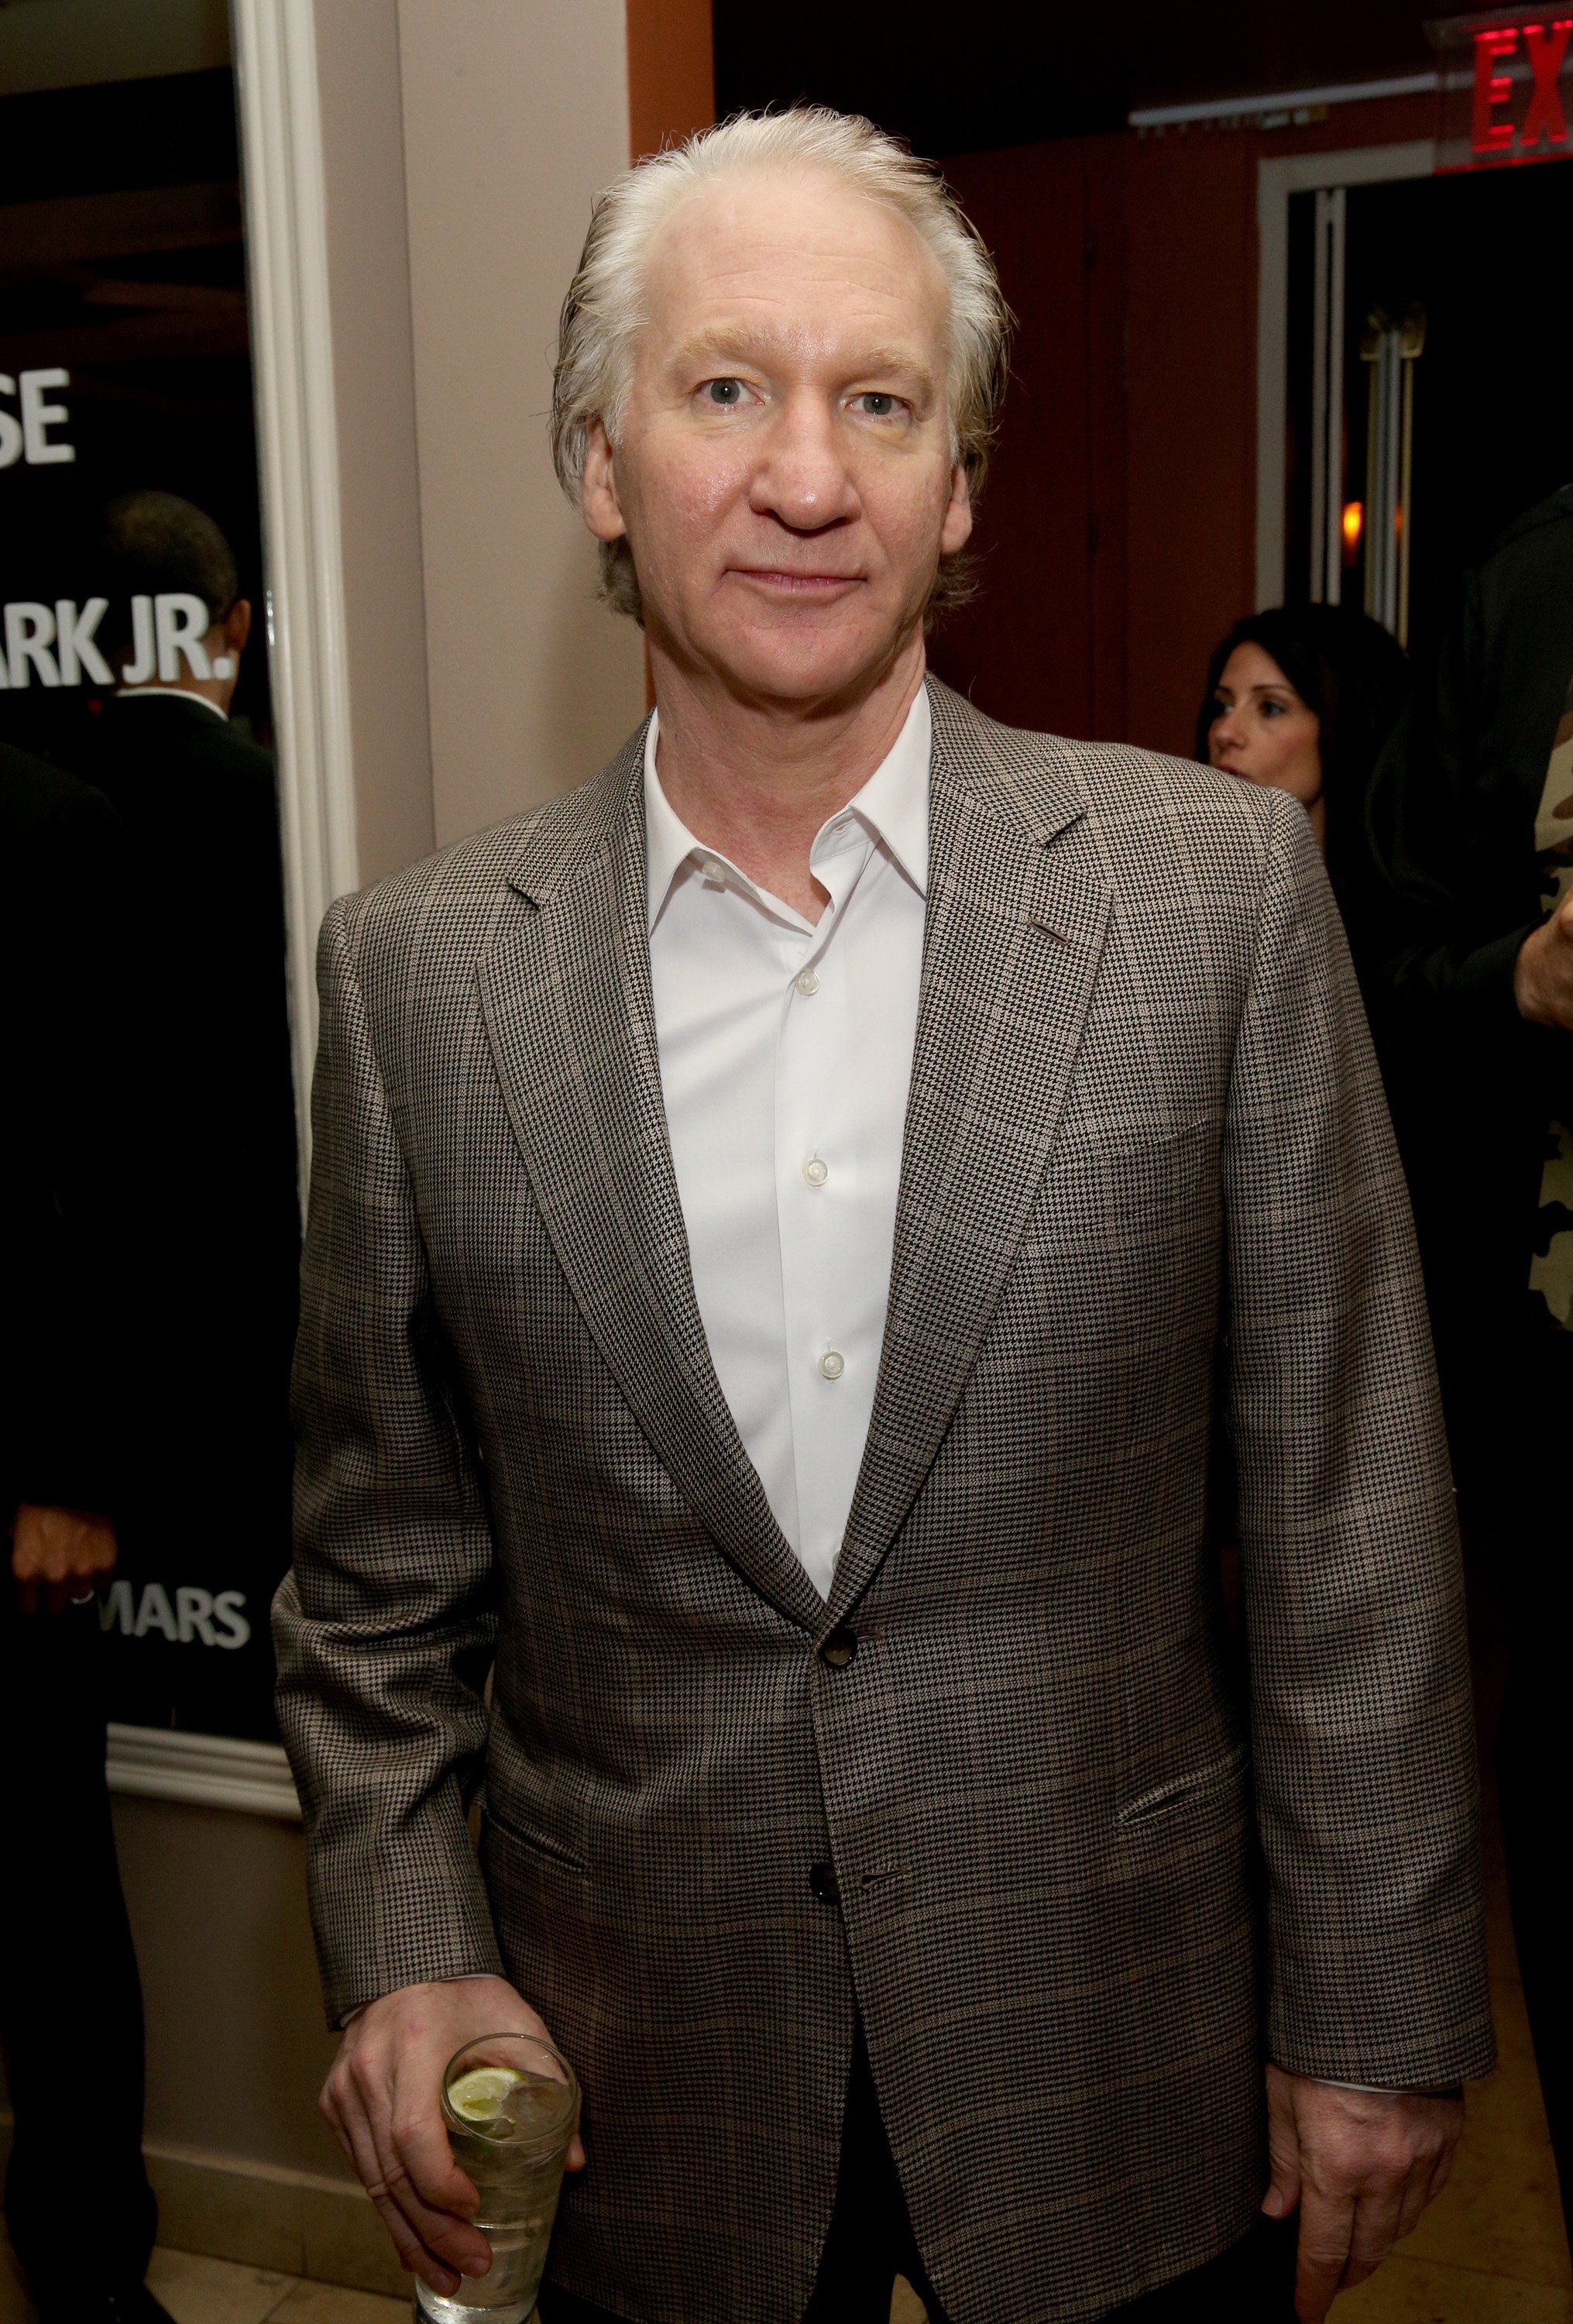 Bill Maher attends the Warner Music Group annual GRAMMY celebration on January 26, 2014 in Los Angeles